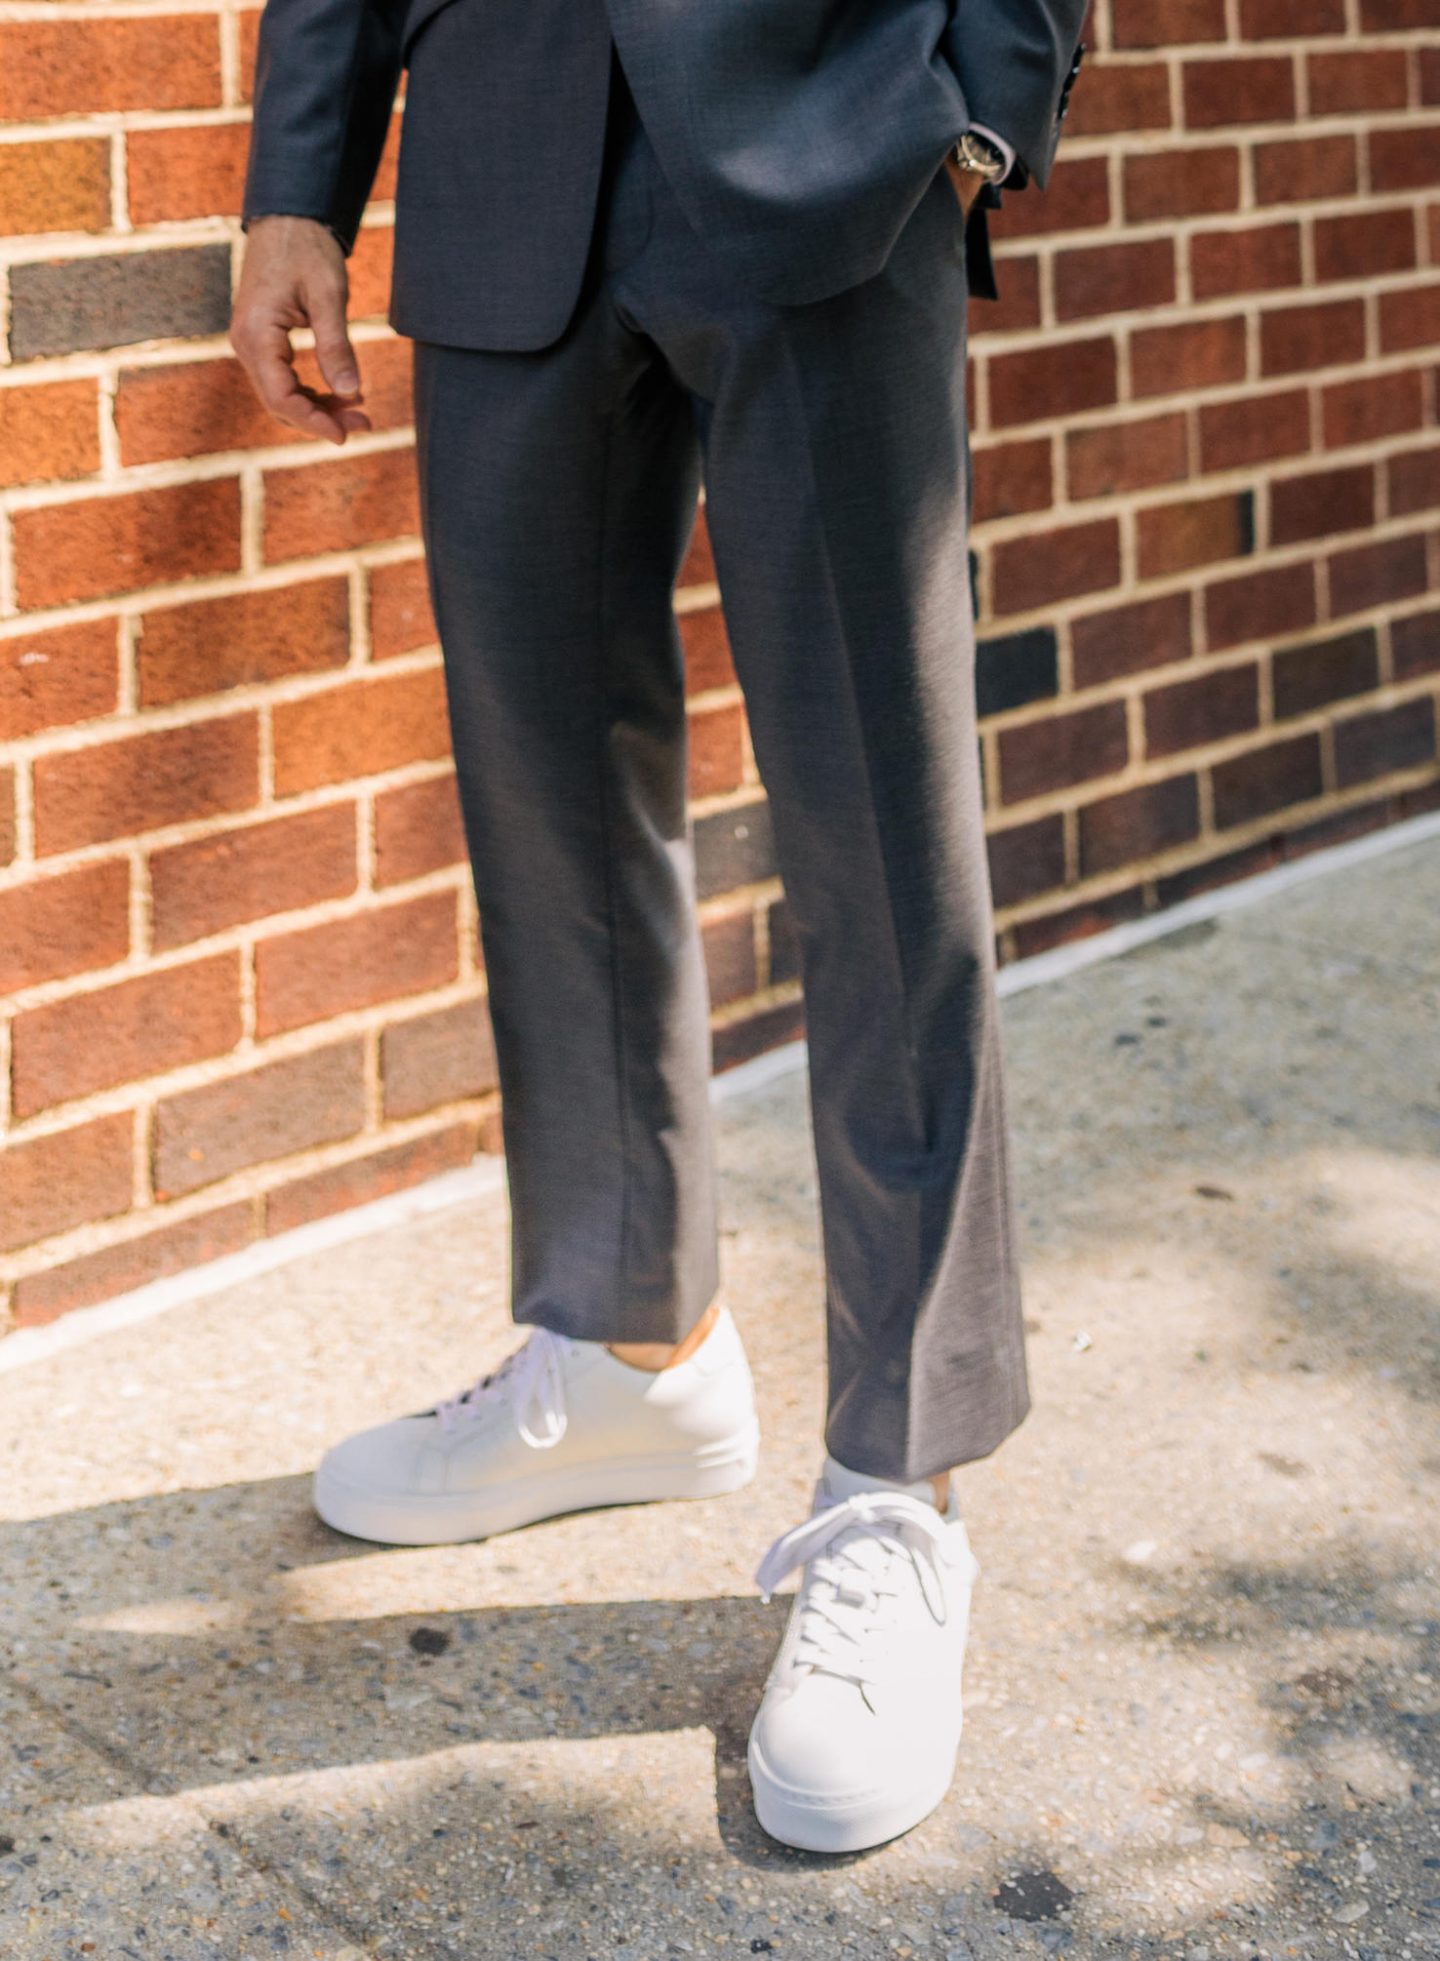 Grey Suit & White Sneakers - The Modest Man